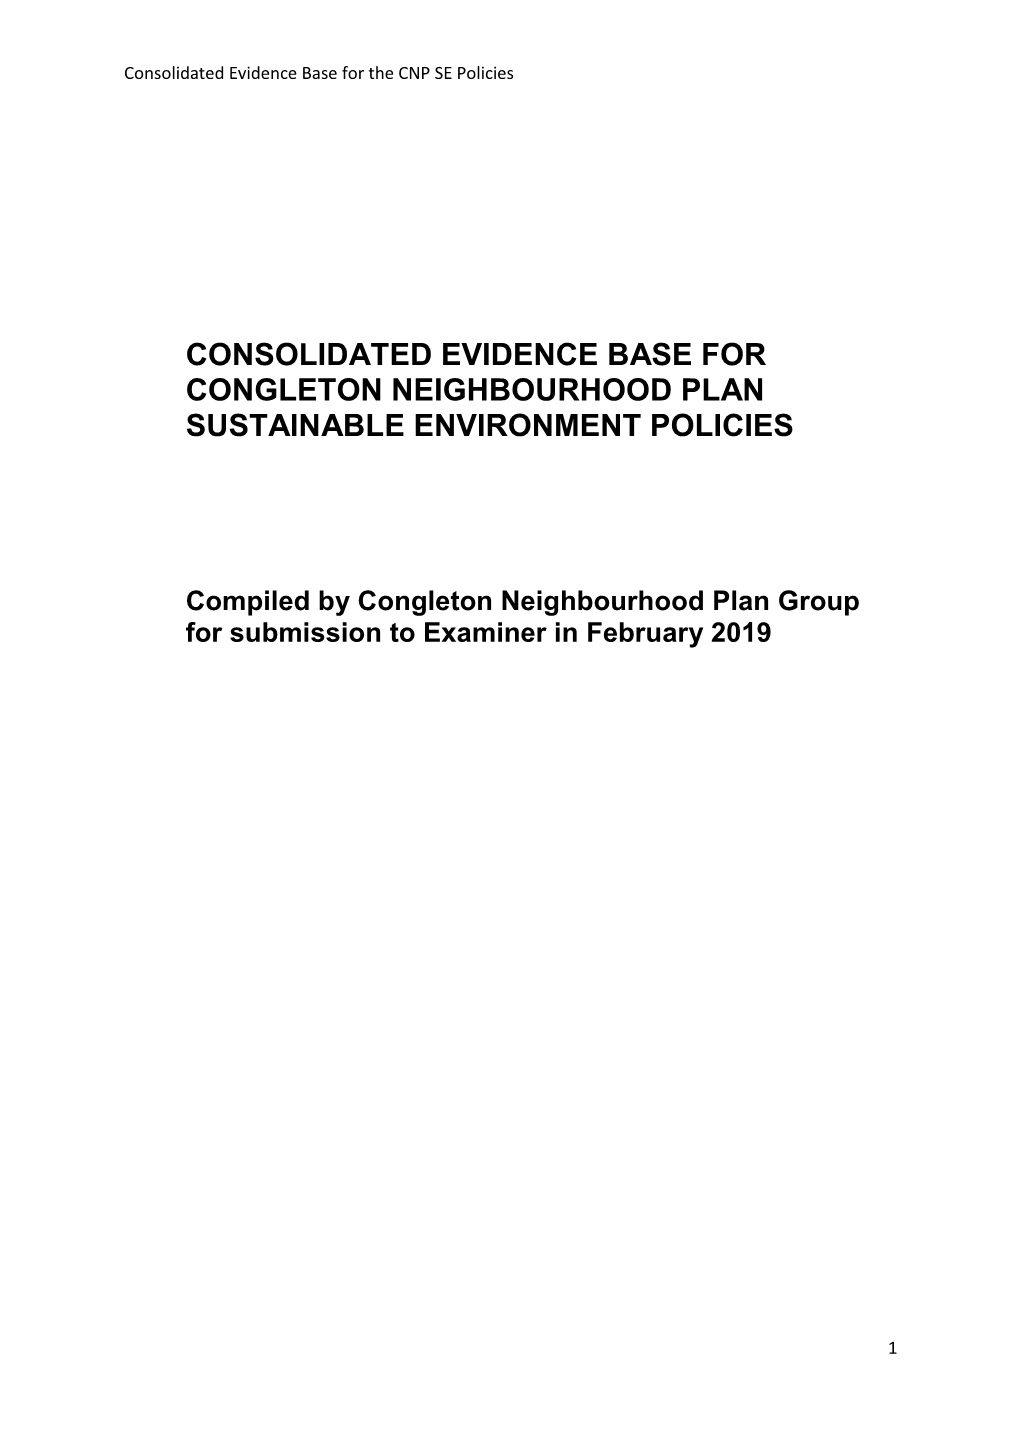 Consolidated Evidence Base for Congleton Neighbourhood Plan Sustainable Environment Policies